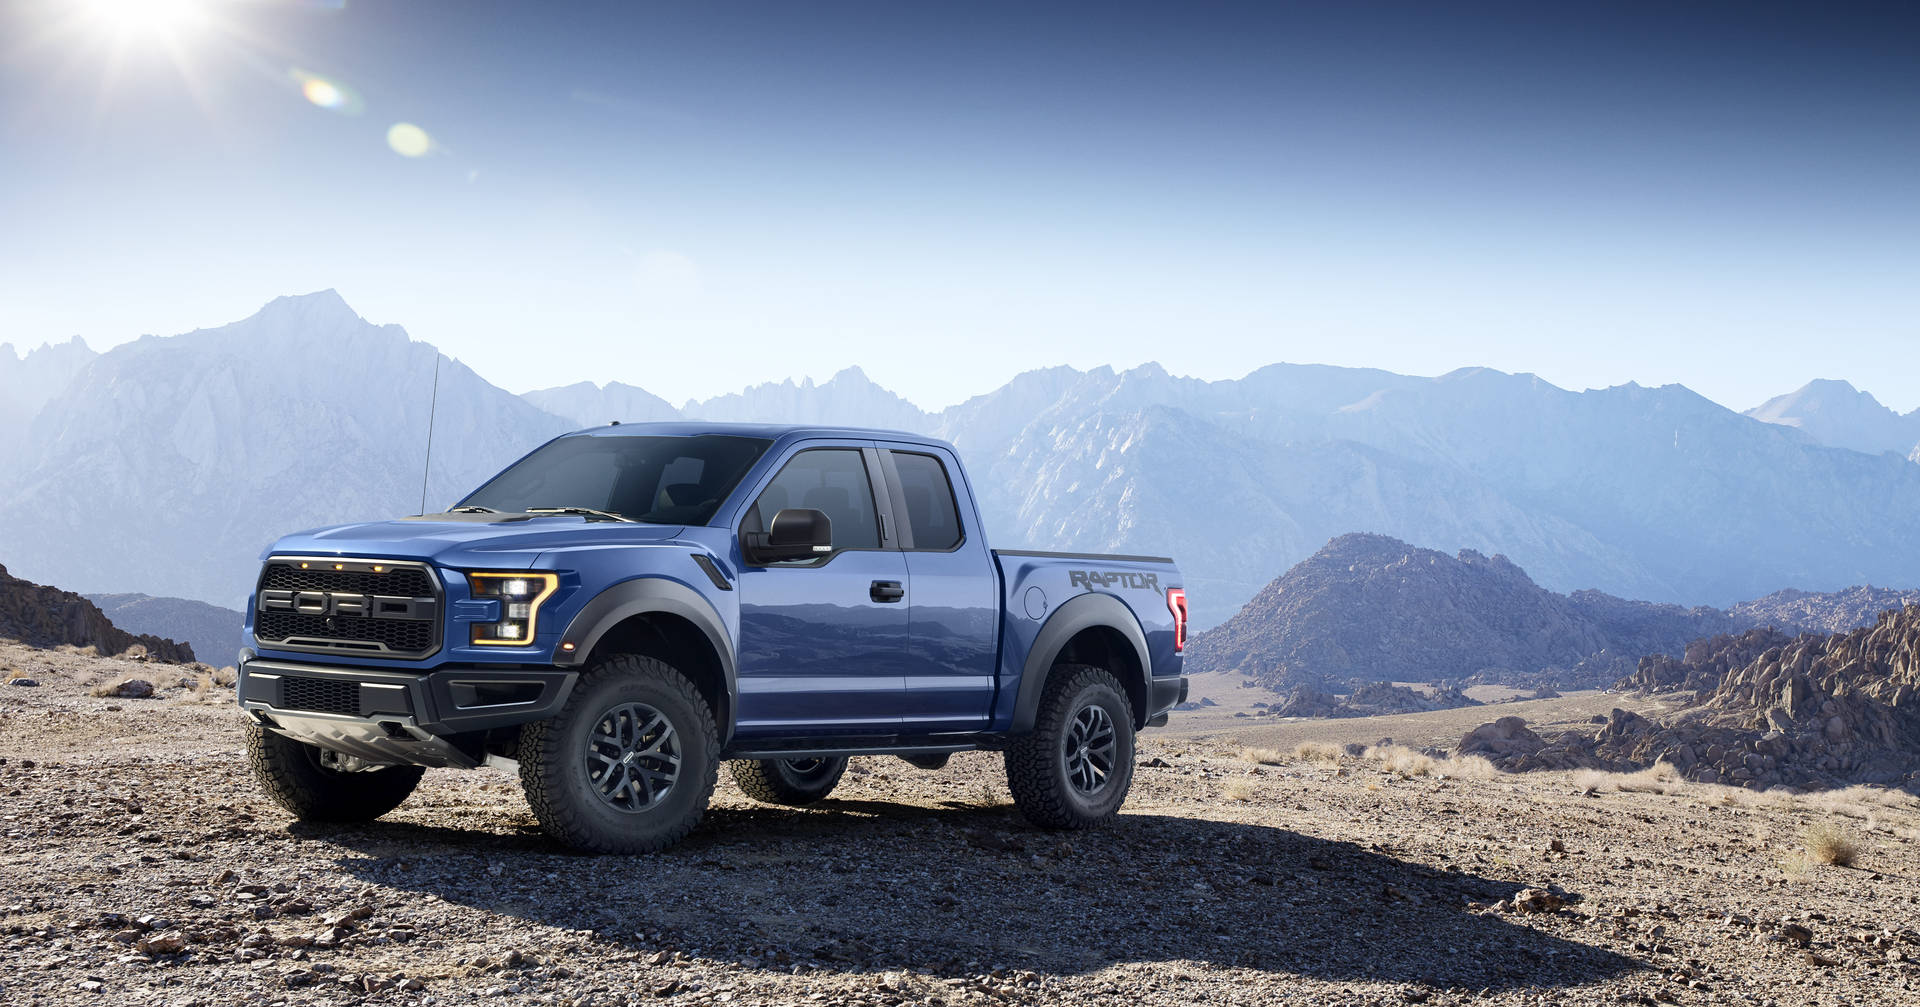 Caption: Majestic Ford Raptor Exploring Wild Mountain Terrains Background